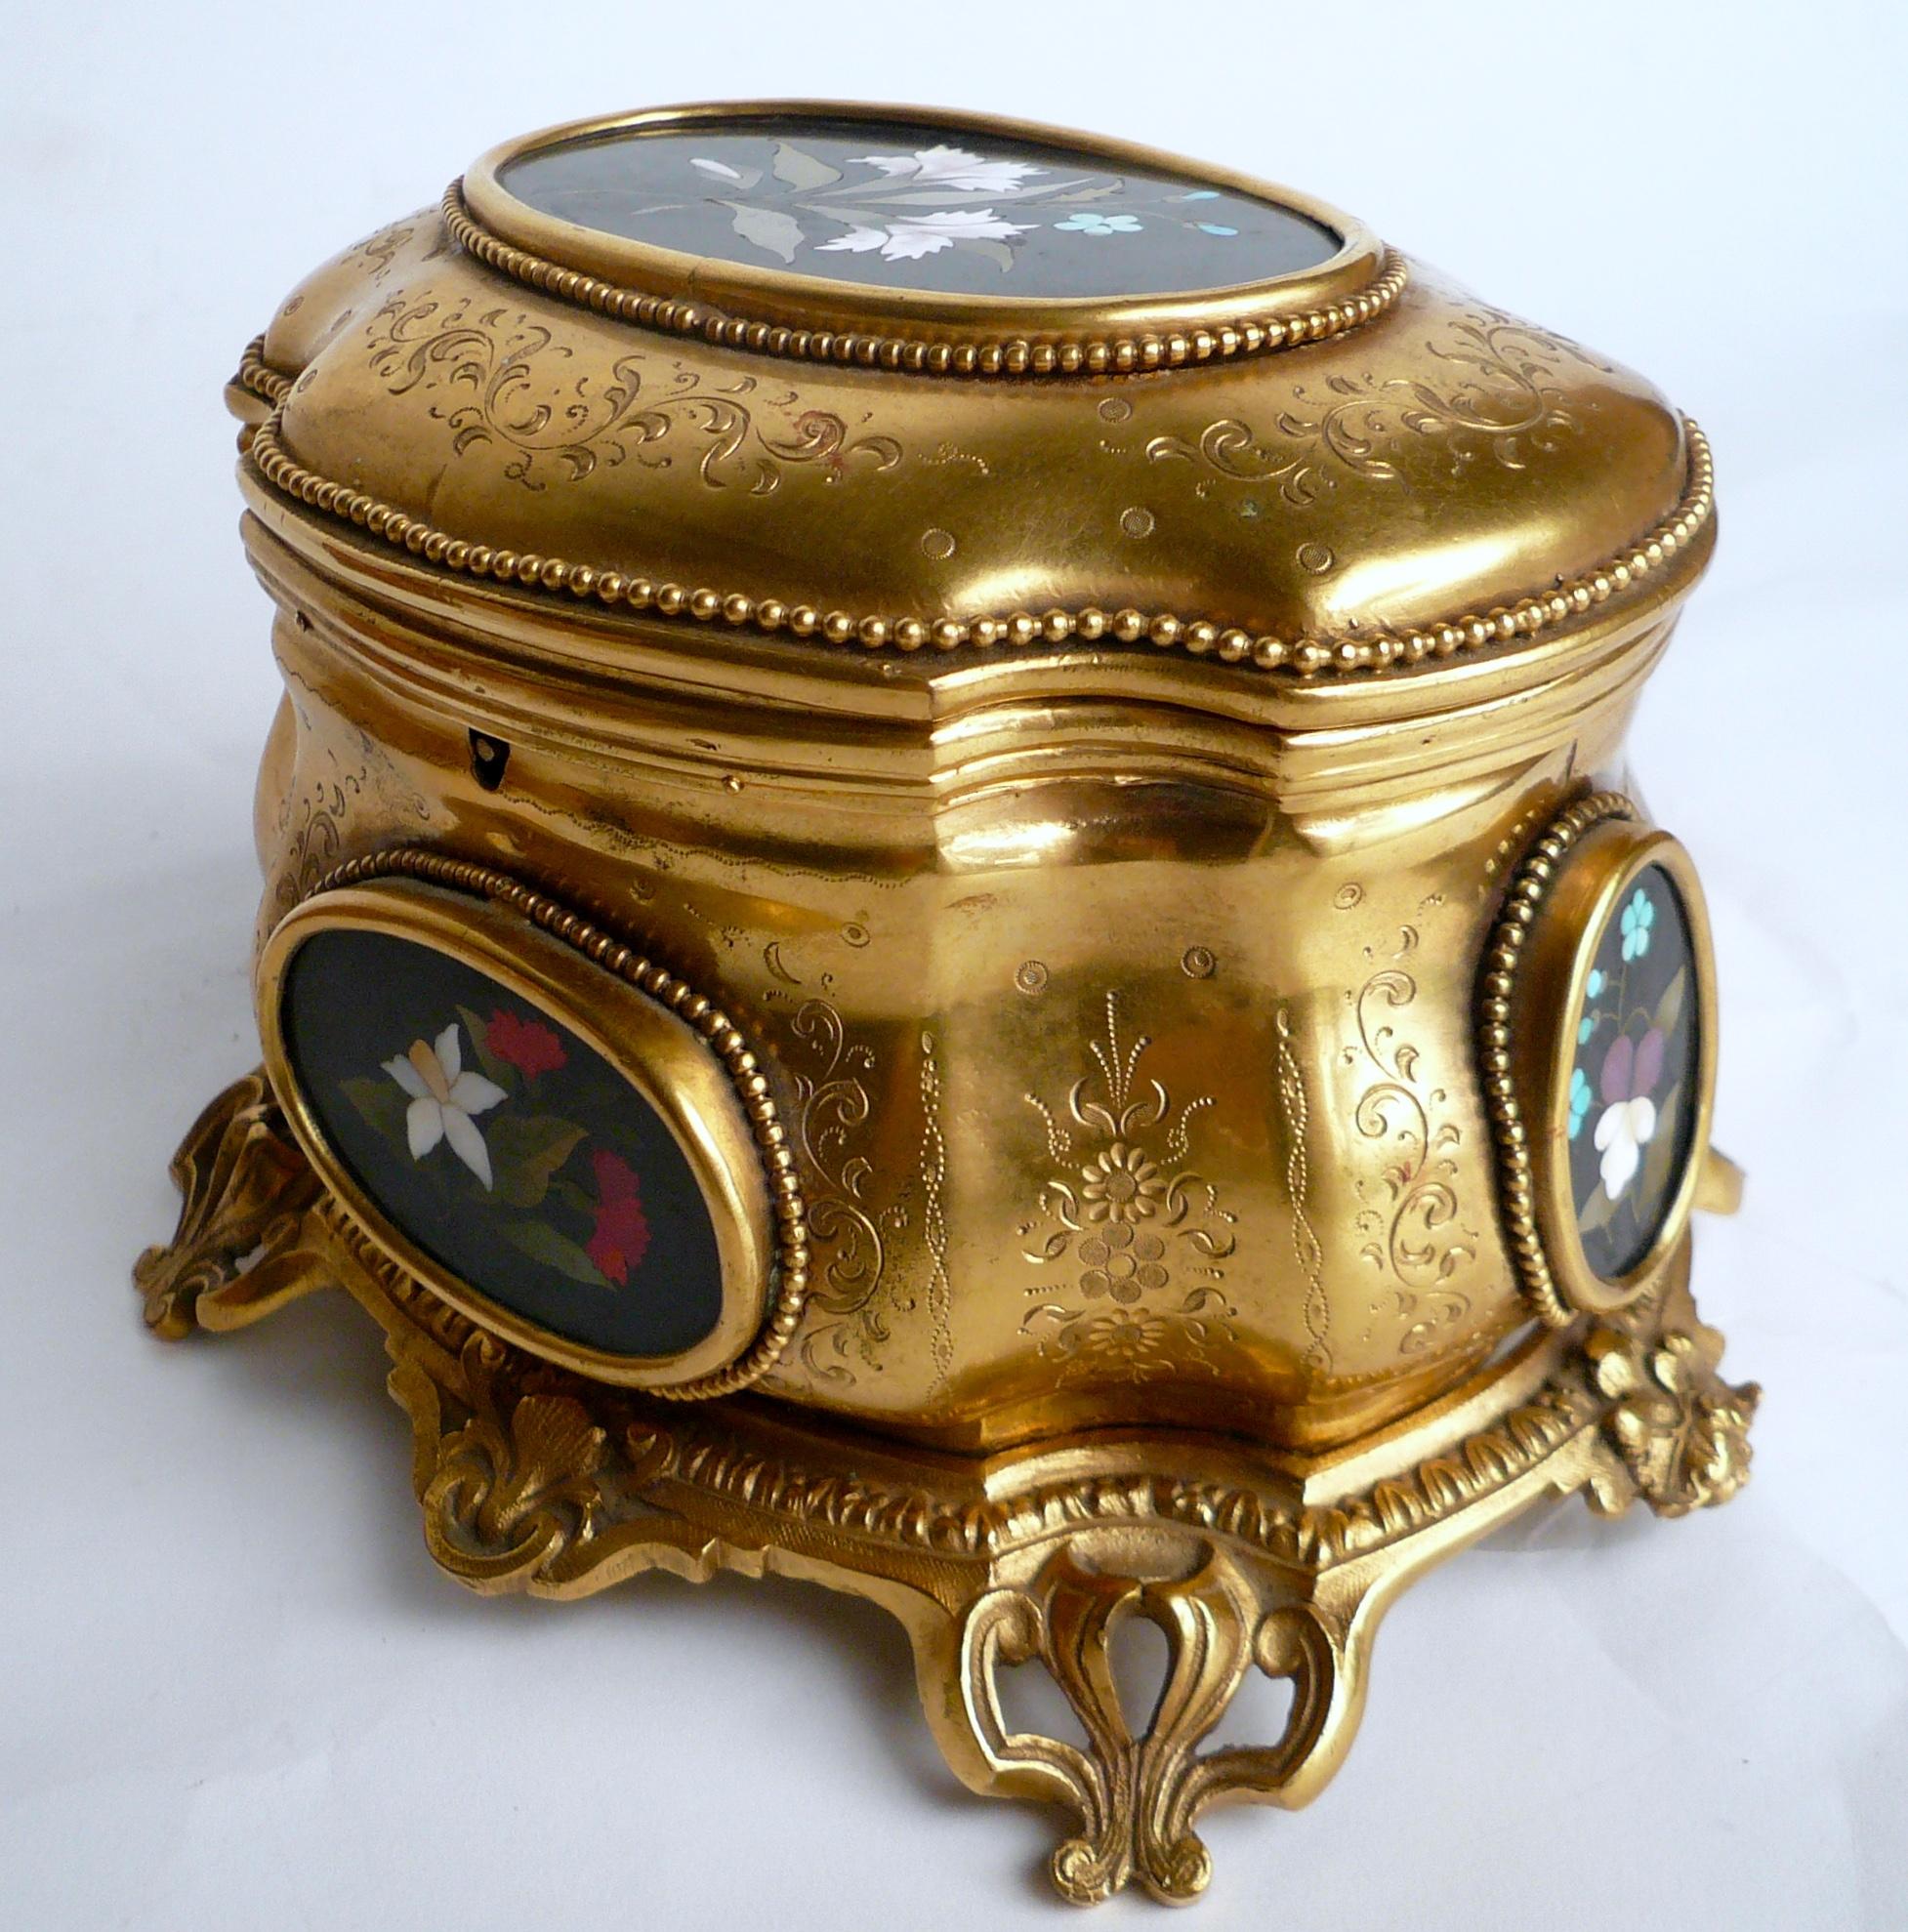 This hand chased gilt bronze box features four oval inlay stone floral reserves that include forget-me-nots, and carnations.
It is signed by renowned maker Tahan of Paris.